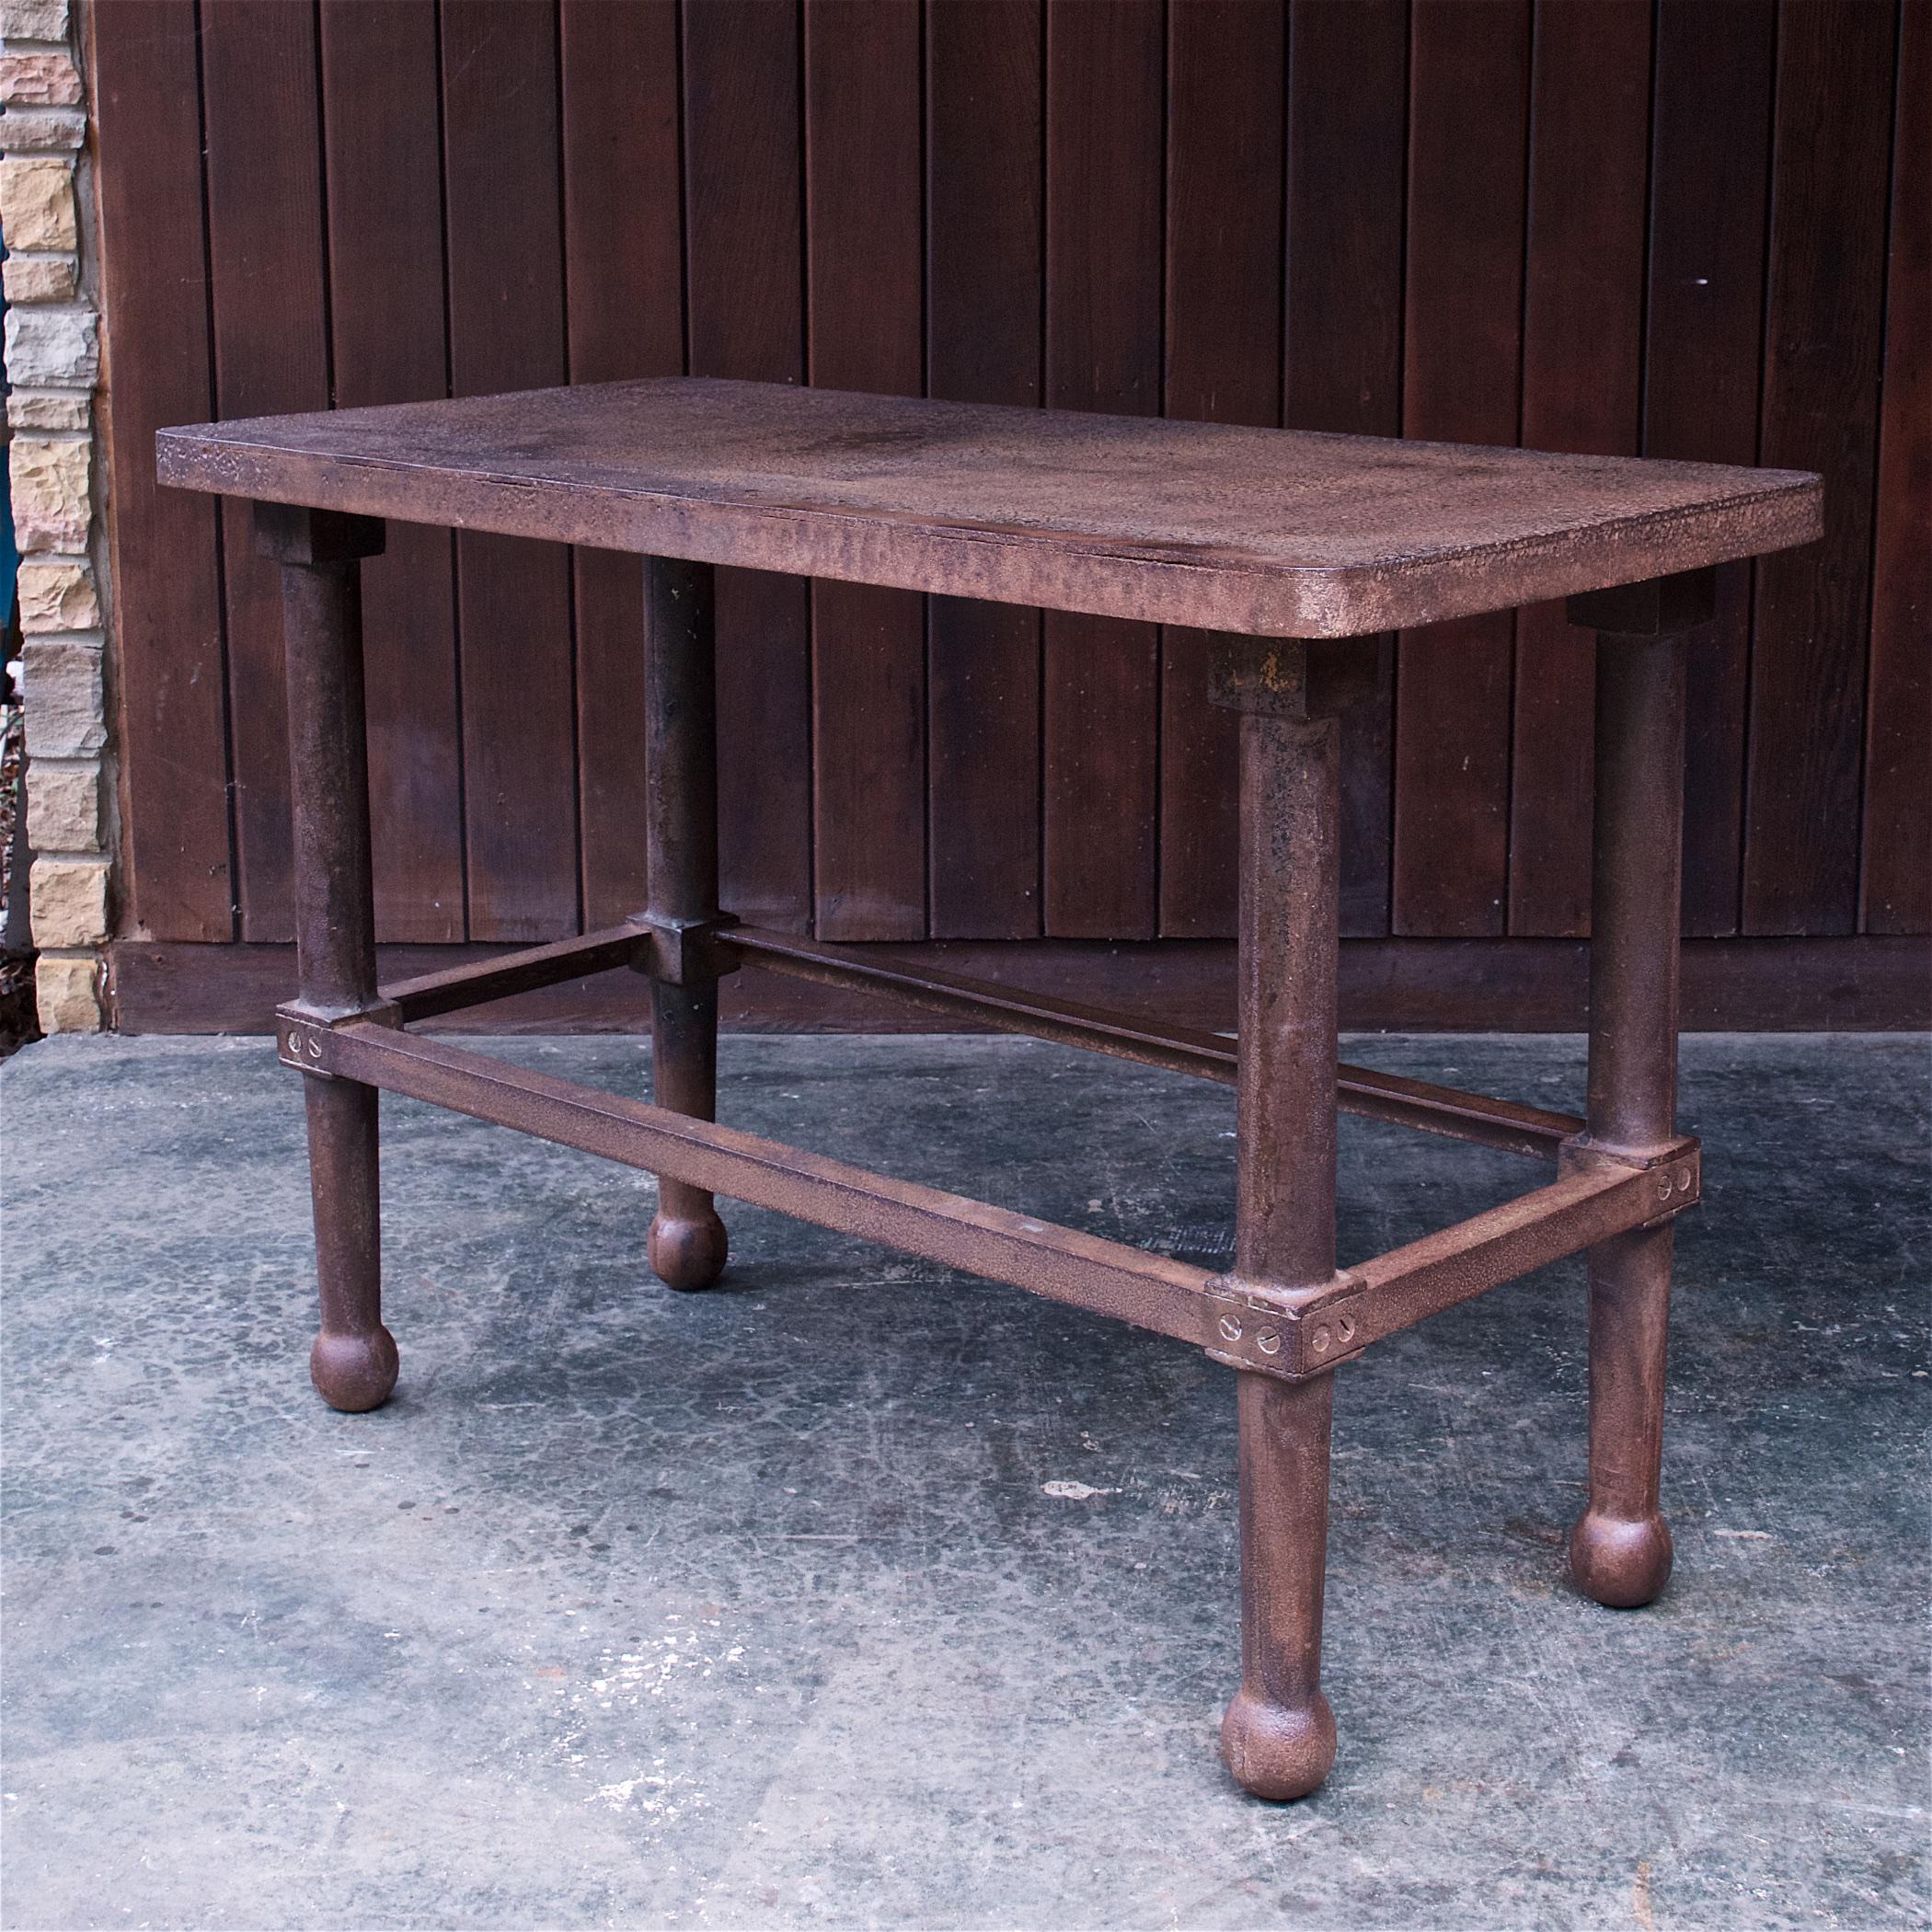 American 1880s Victorian Mercantile Forged Iron Work Table Vintage Industrial Console For Sale